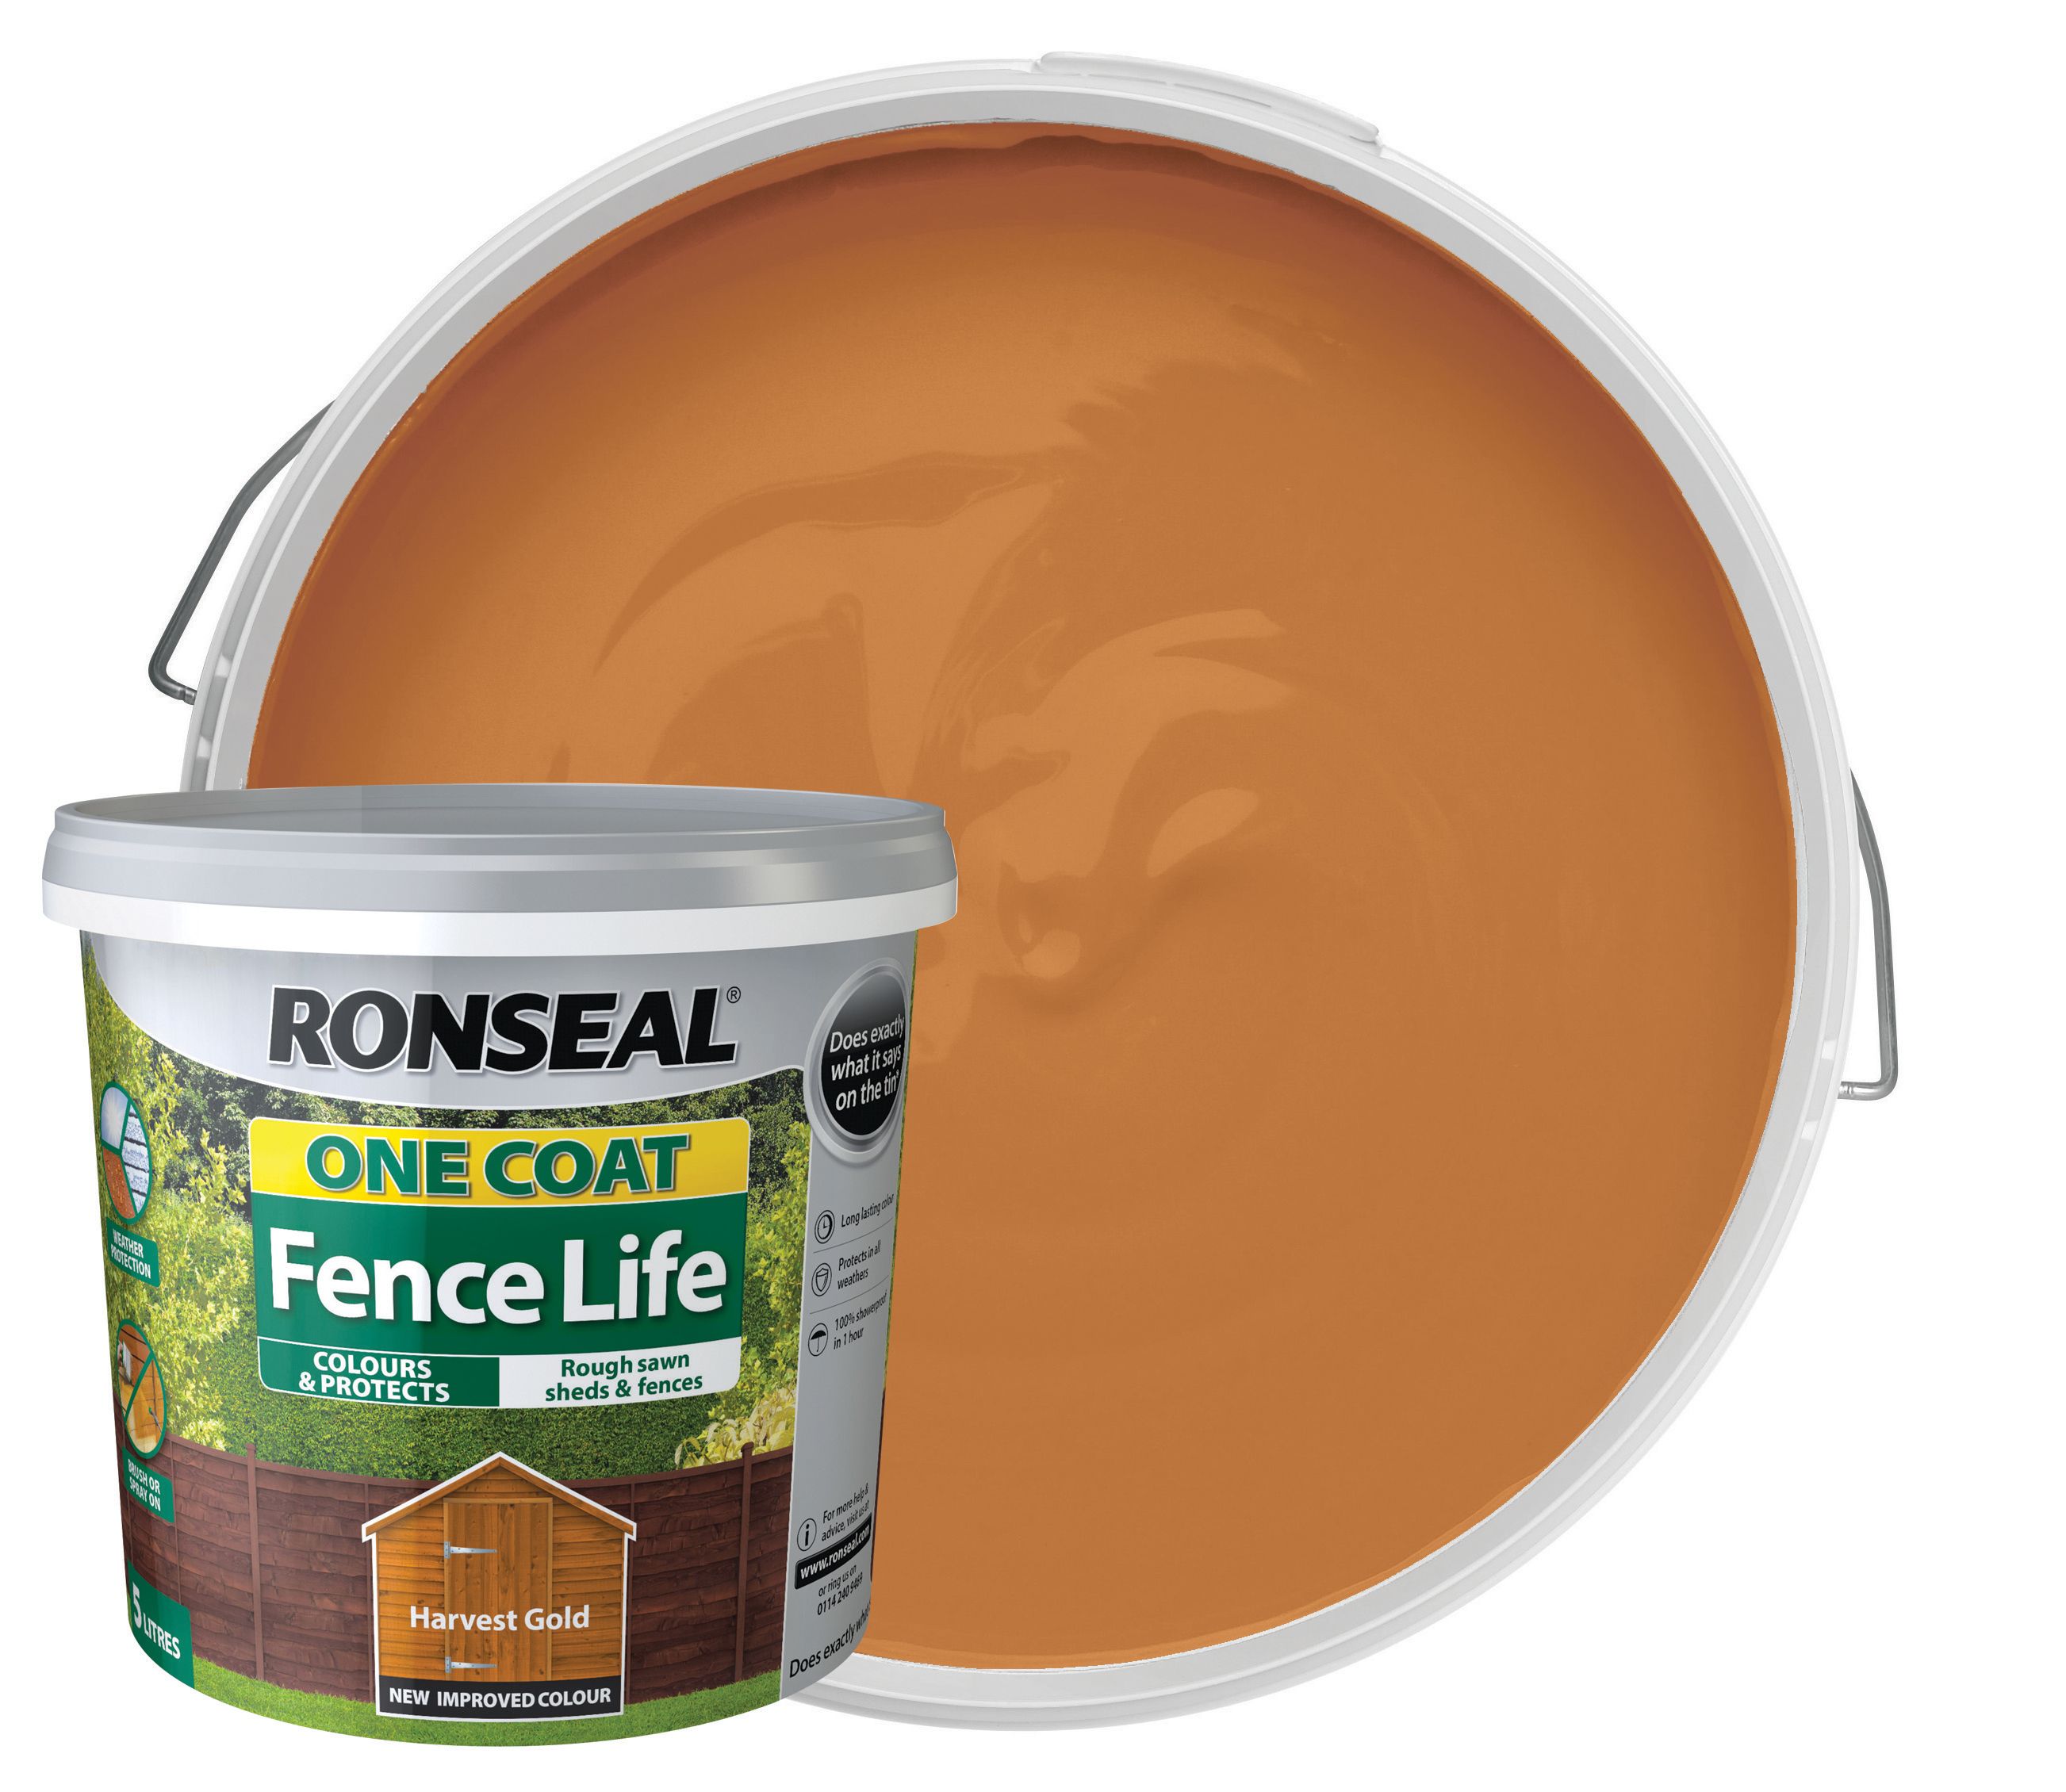 Ronseal One Coat Fence Life Matt Shed & Fence Treatment - Harvest Gold 5L